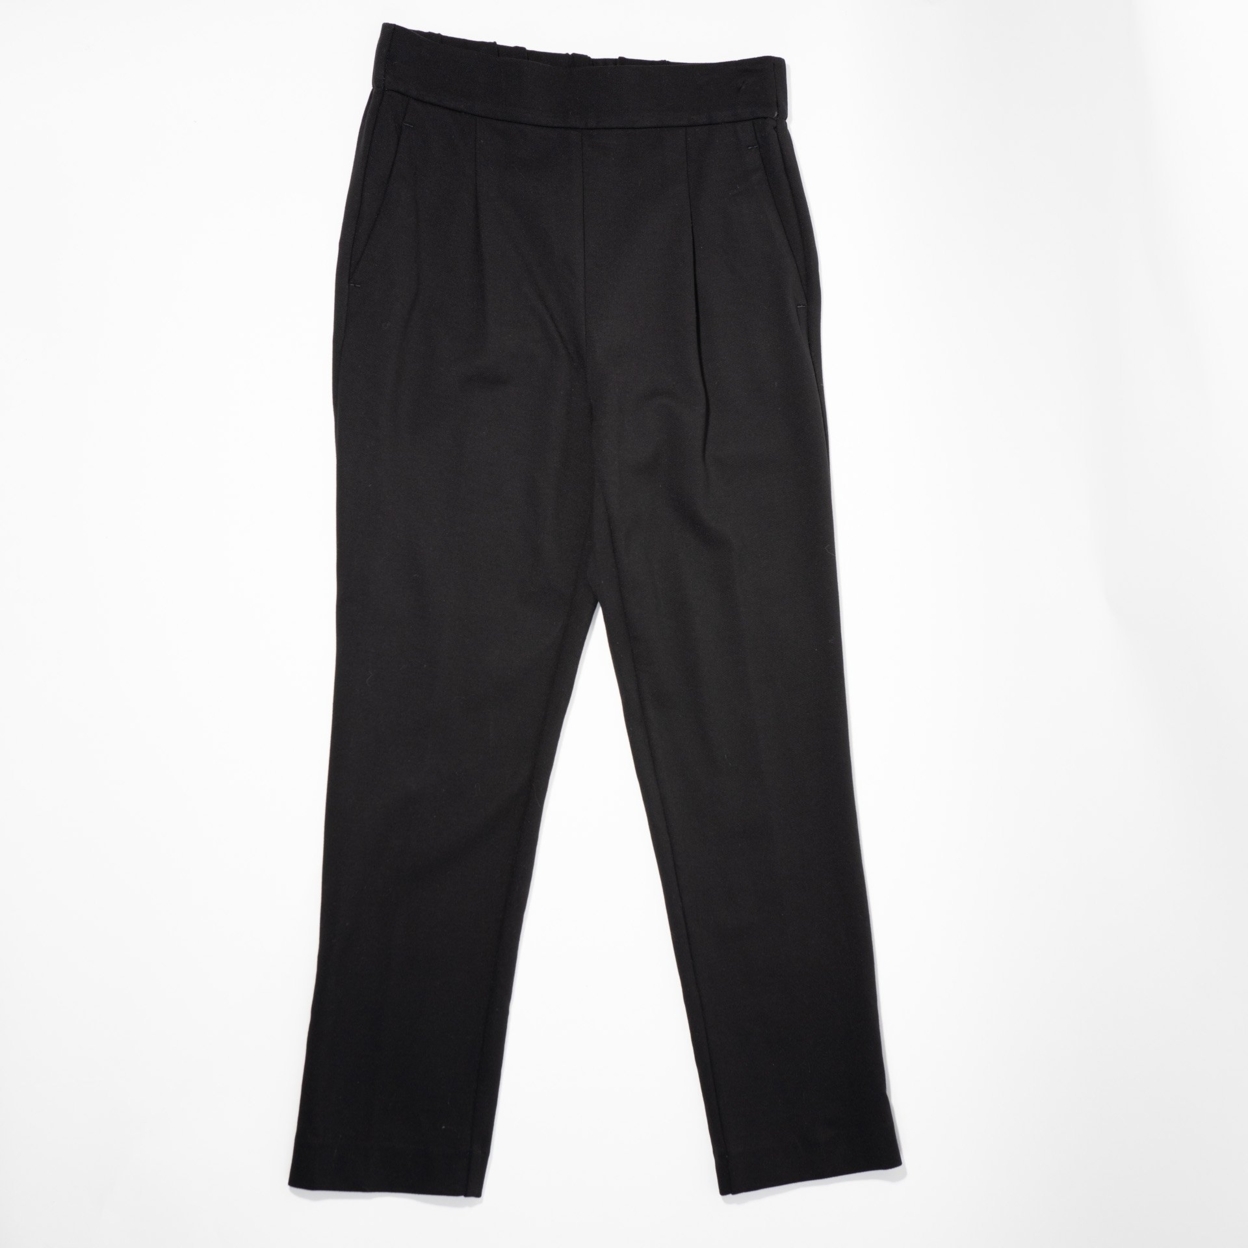 Ann Taylor Petite Pull-On Easy Ankle Pants Size XSP